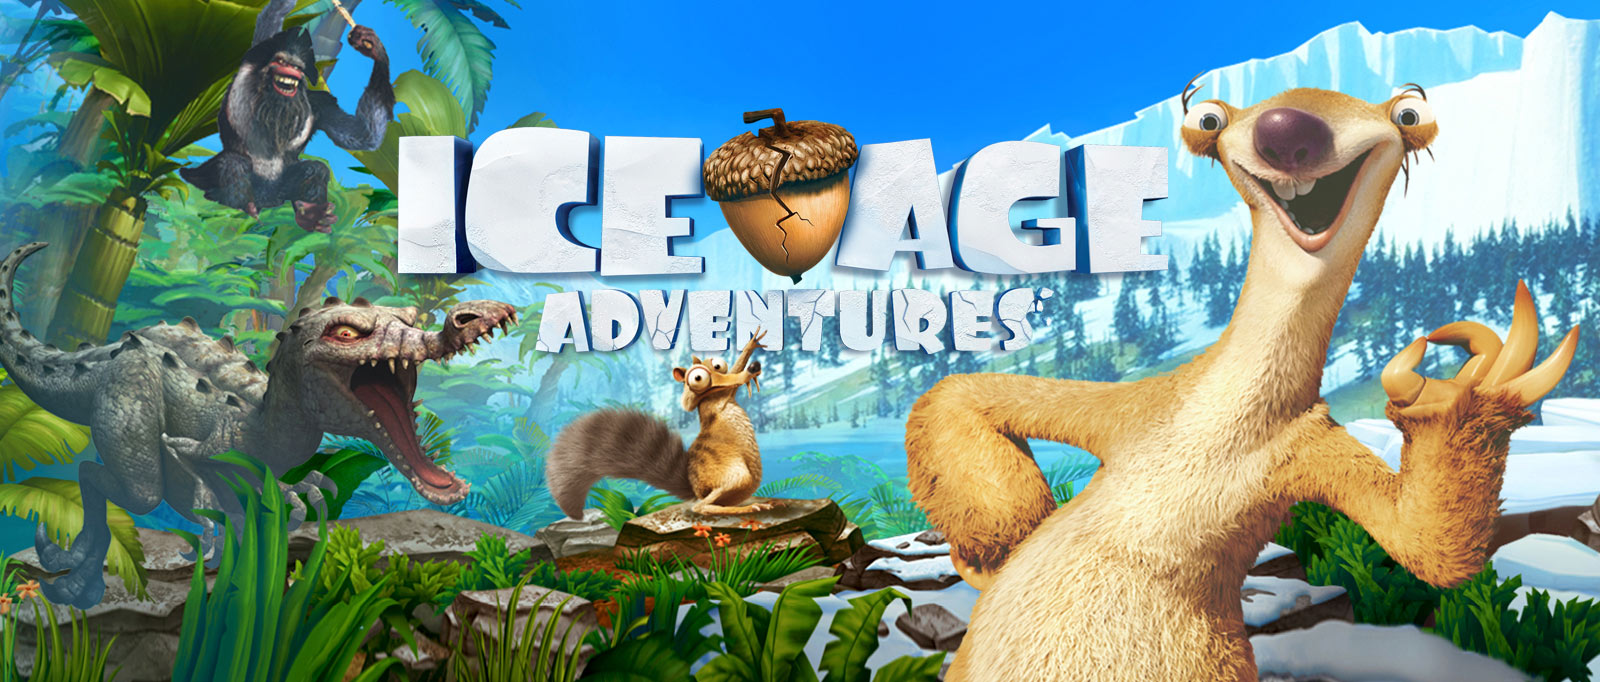 the ice age adventures of buck wild dvd release date